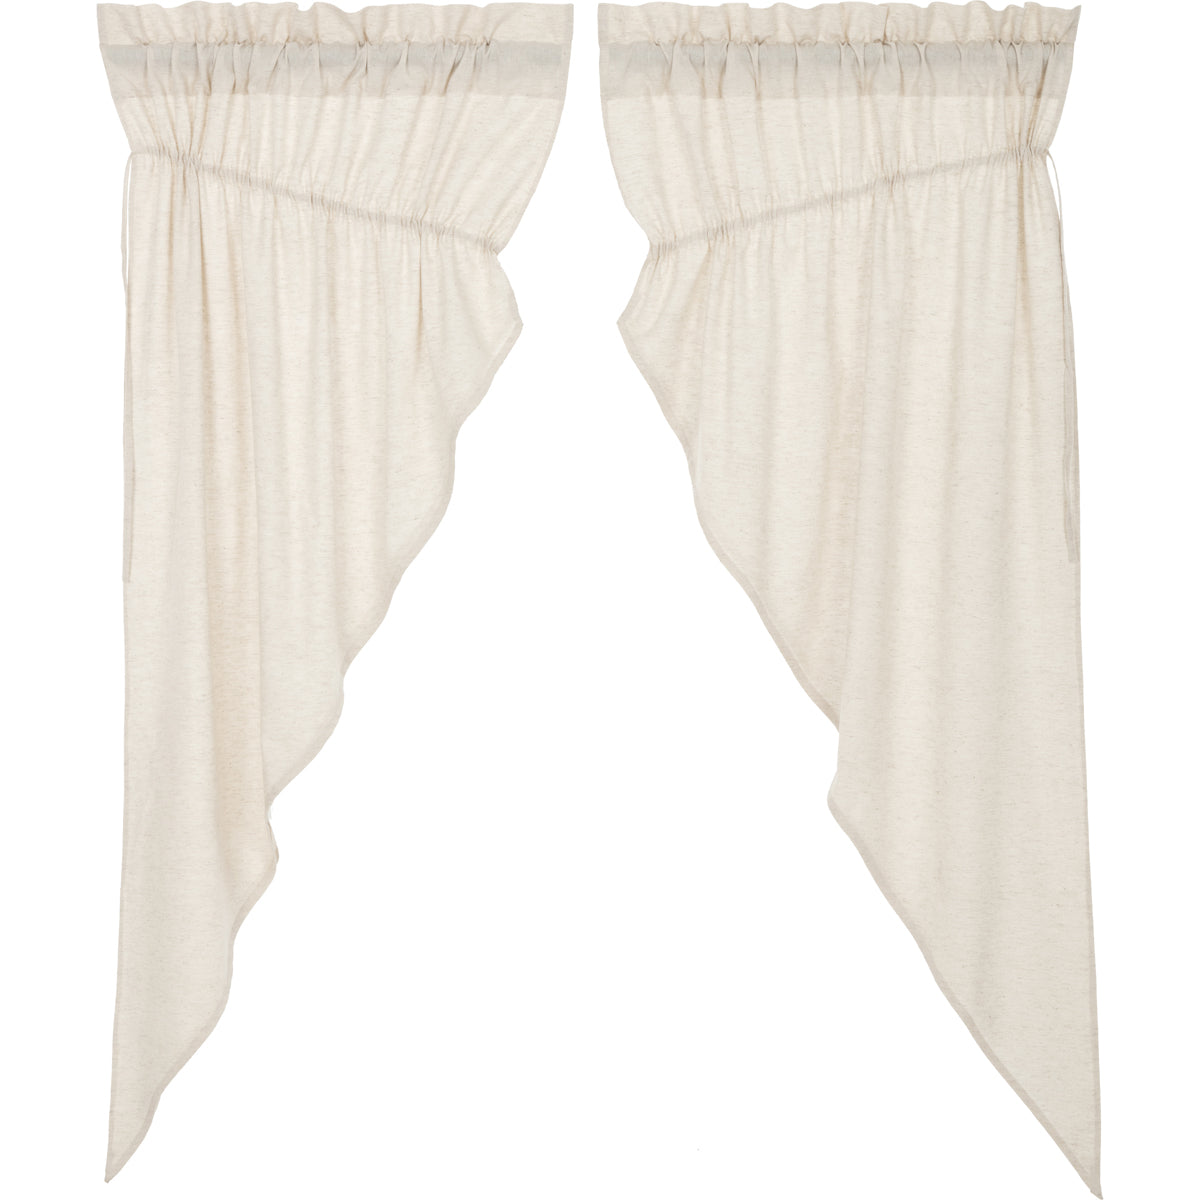 Simple Life Flax Natural Prairie Short Curtain Panel Set of 2 63x36x18 VHC Brands